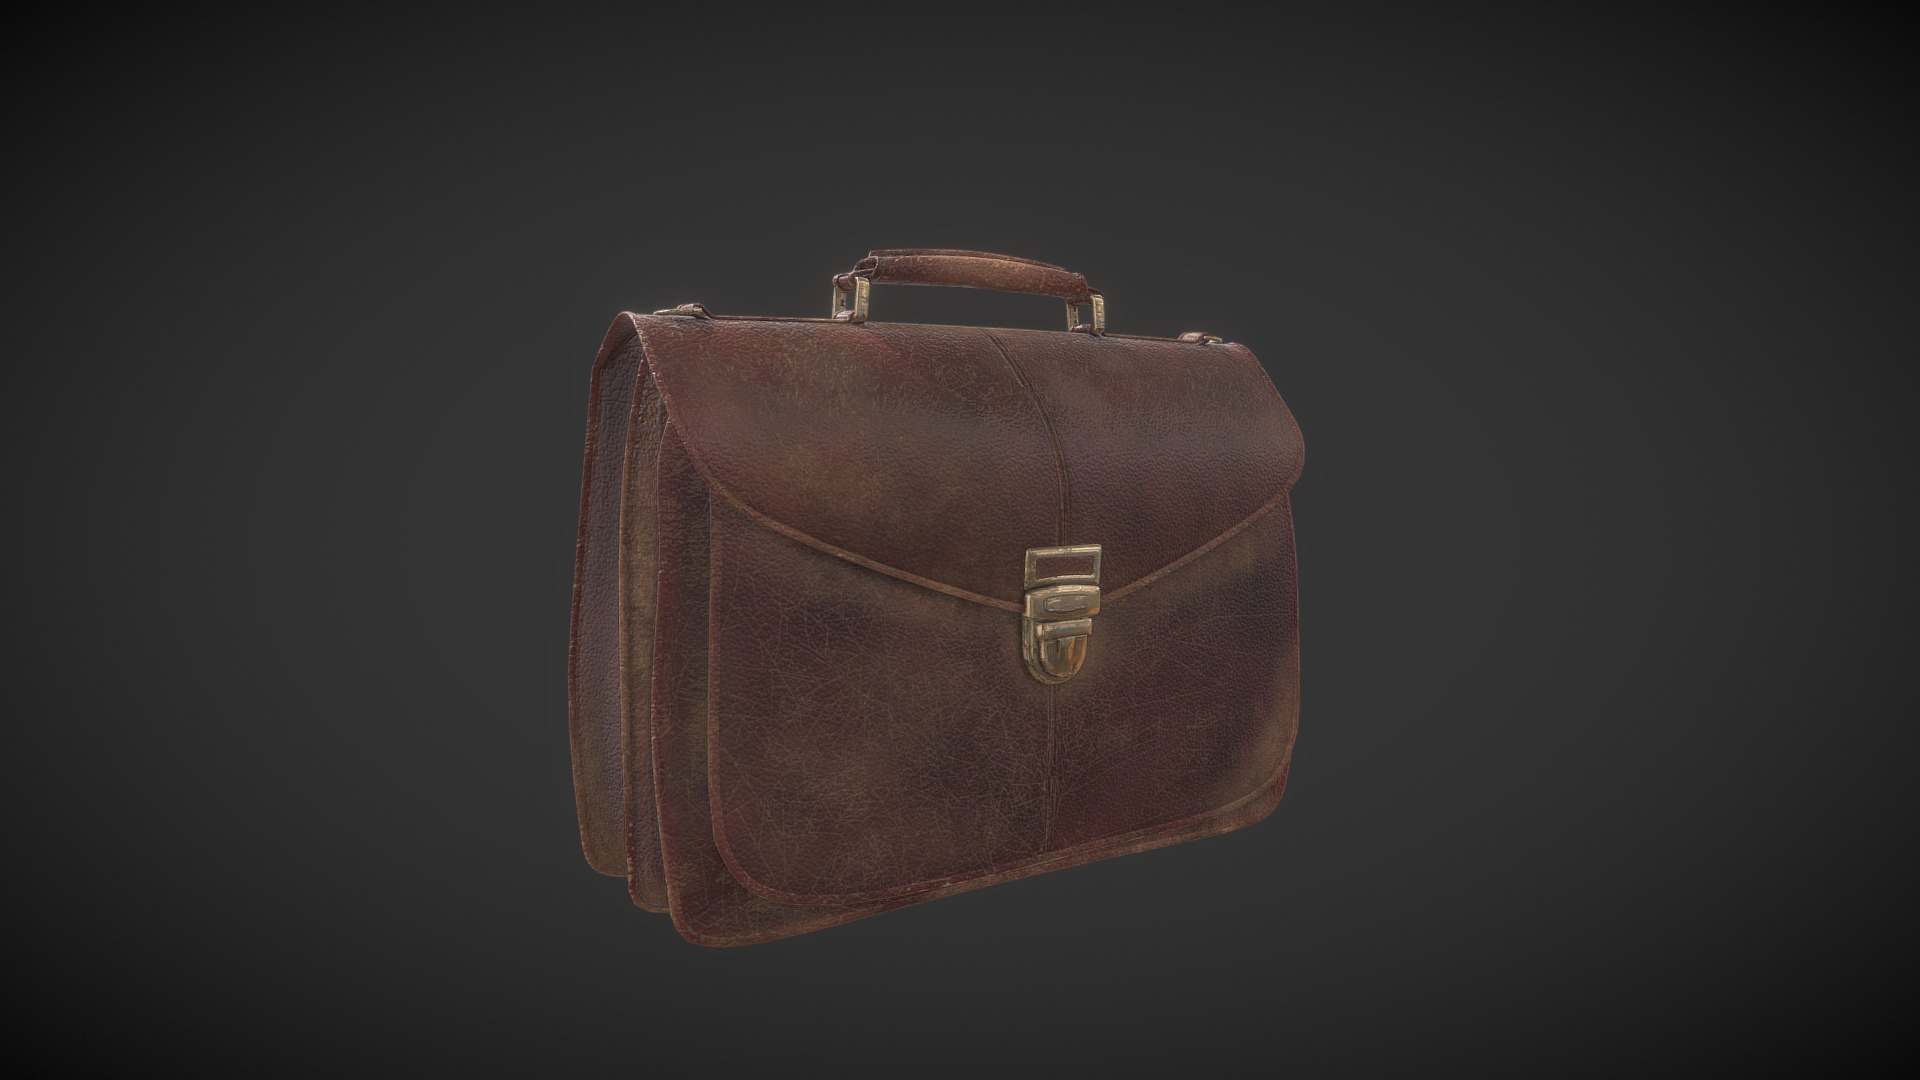 3D model leather bag office - This is a 3D model of the leather bag office. The 3D model is about a brown leather purse.